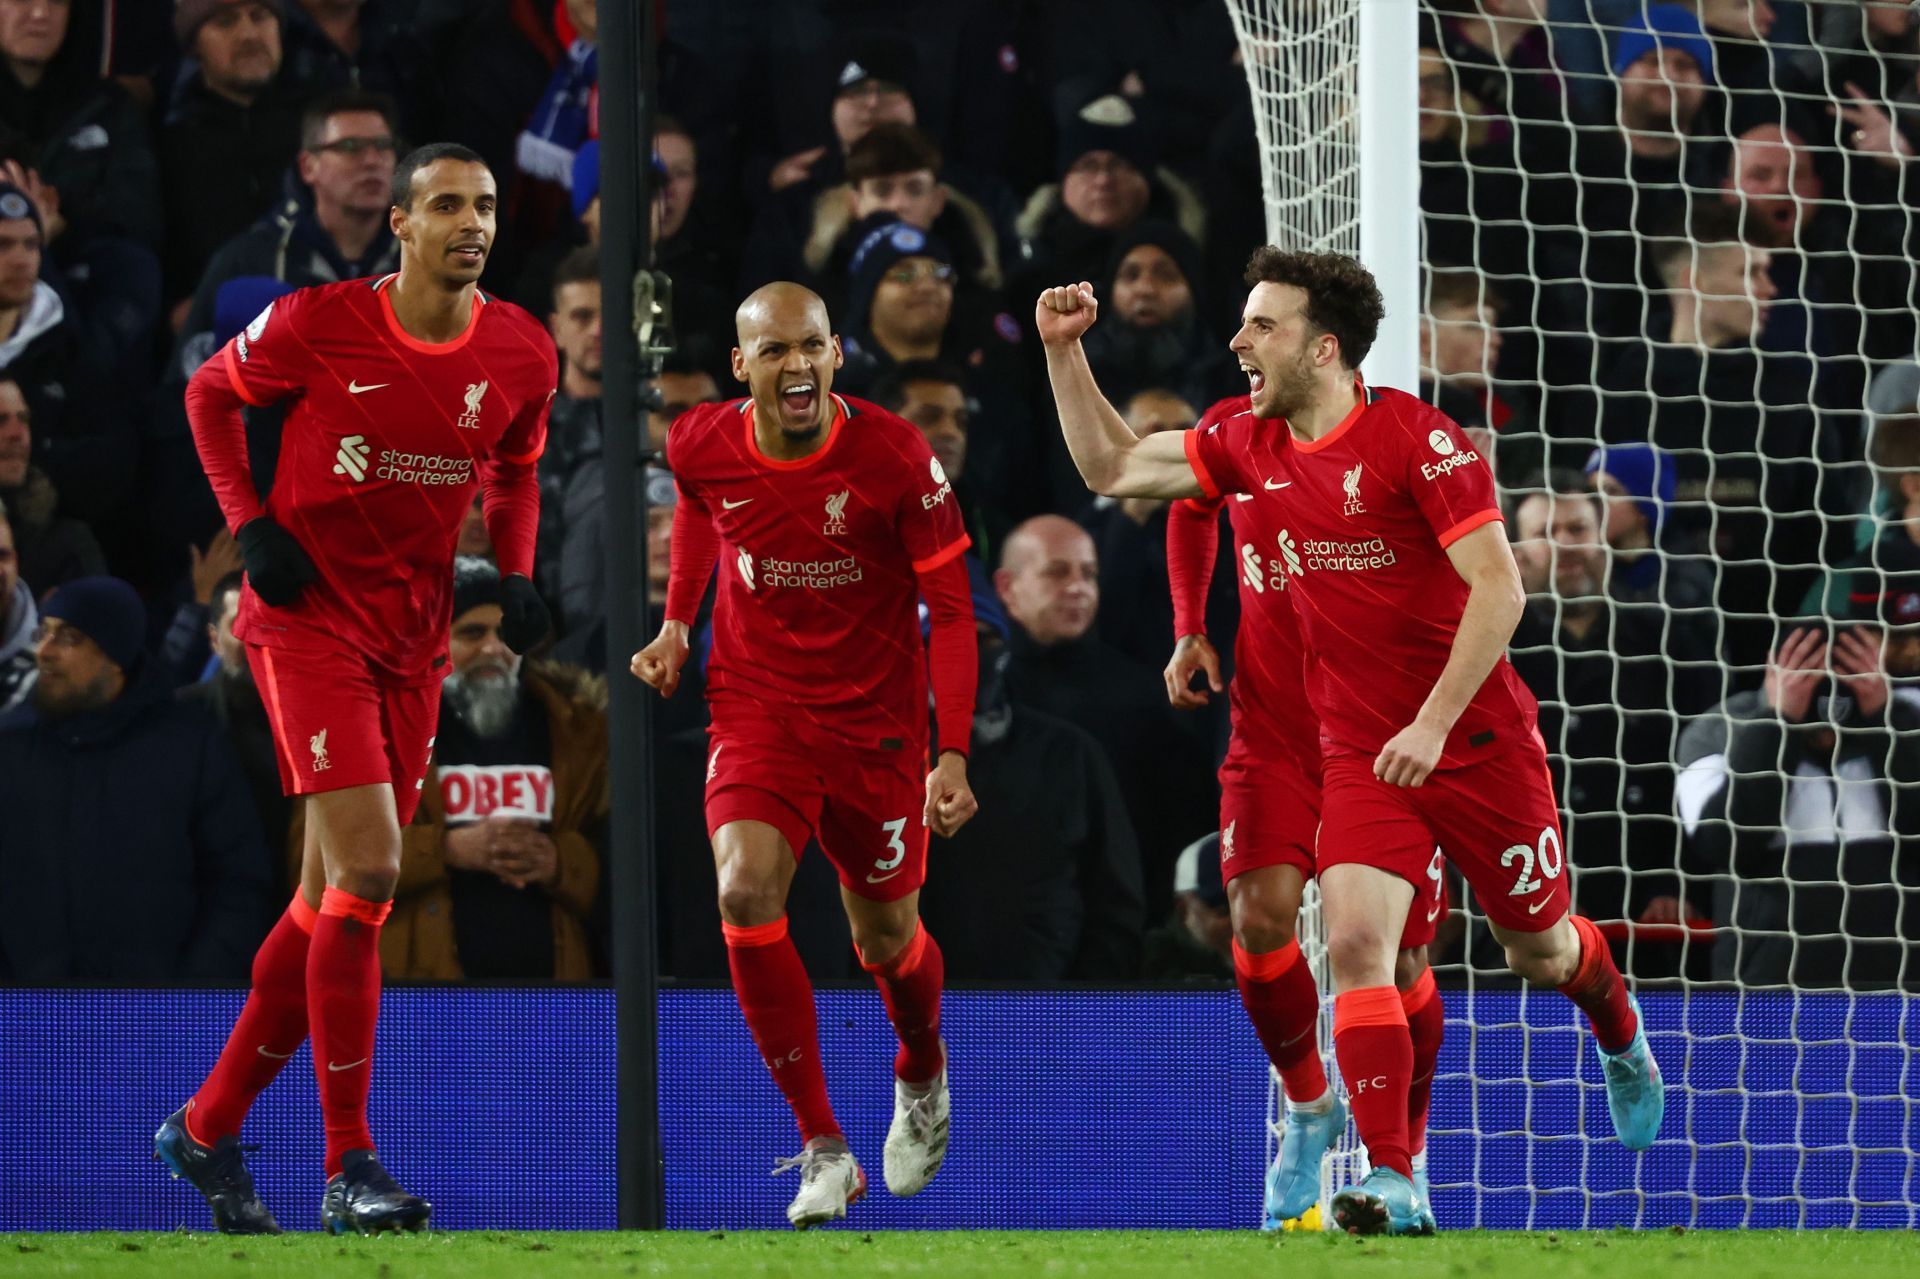 Liverpool have been awarded the most penalties in Premier League history